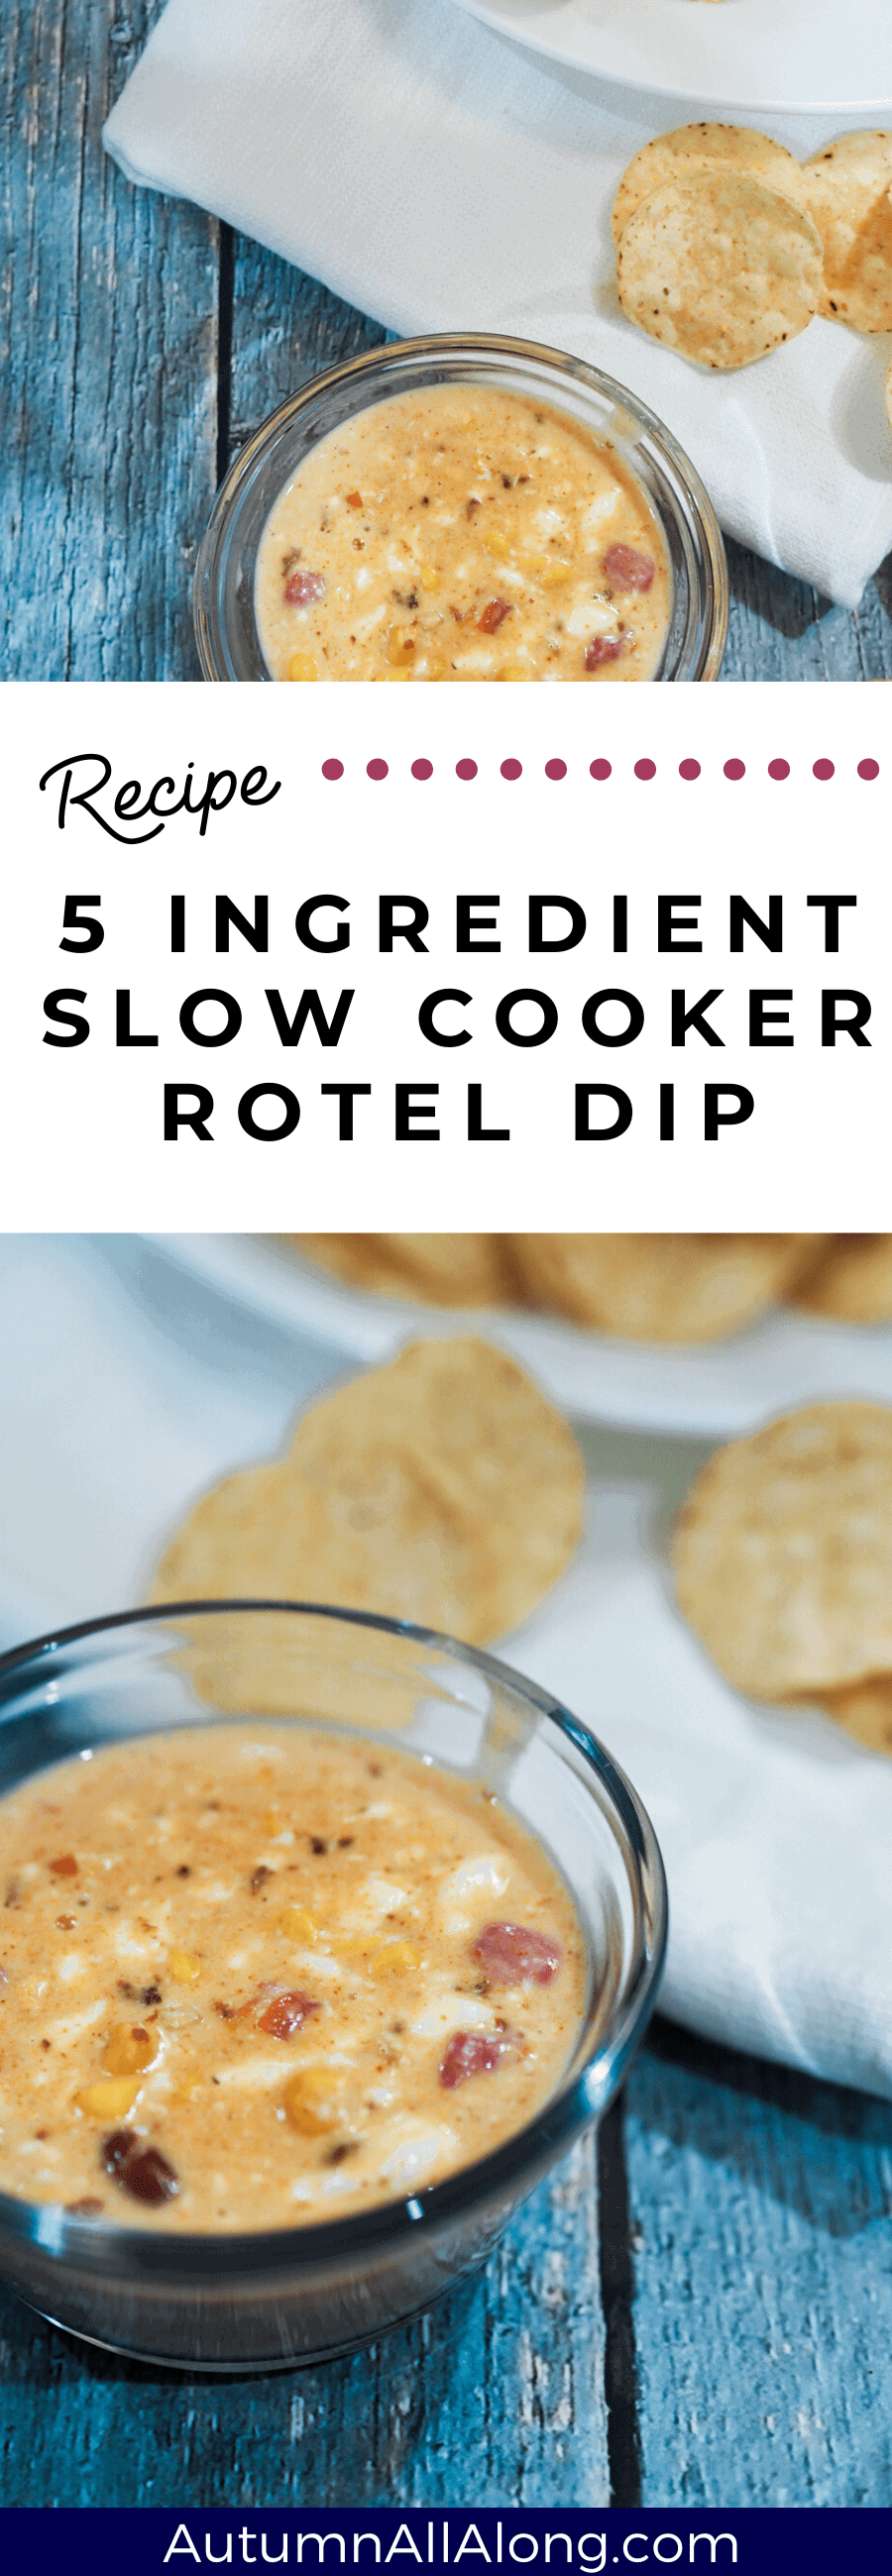 Looking for a way to use your mini slow cooker?  Try my favorite 5 ingredient slow cooker rotel dip recipe that is perfect as a game day chip dip. | via Autumn All Along